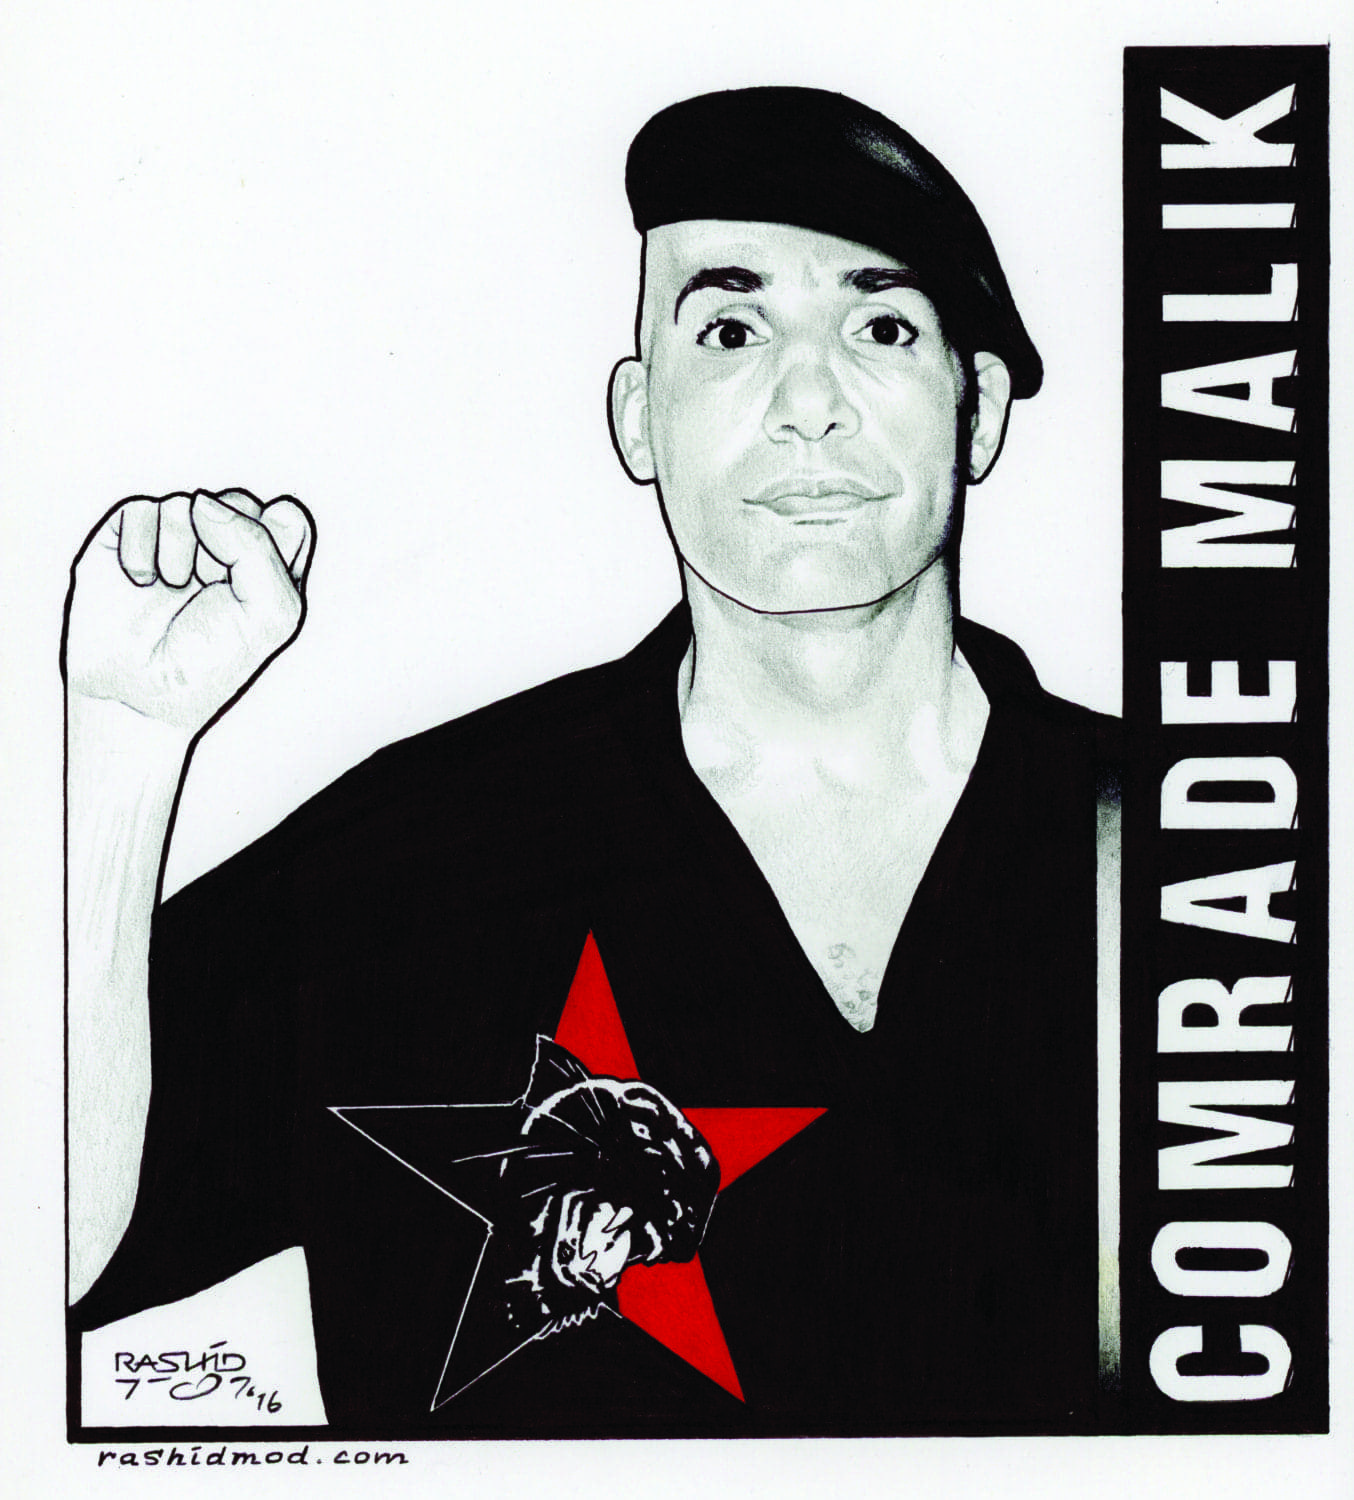 Comrade-Malik-art-by-Rashid-1116, Federal court in Louisiana ignores COVID terror inside FCI Oakdale, Behind Enemy Lines 